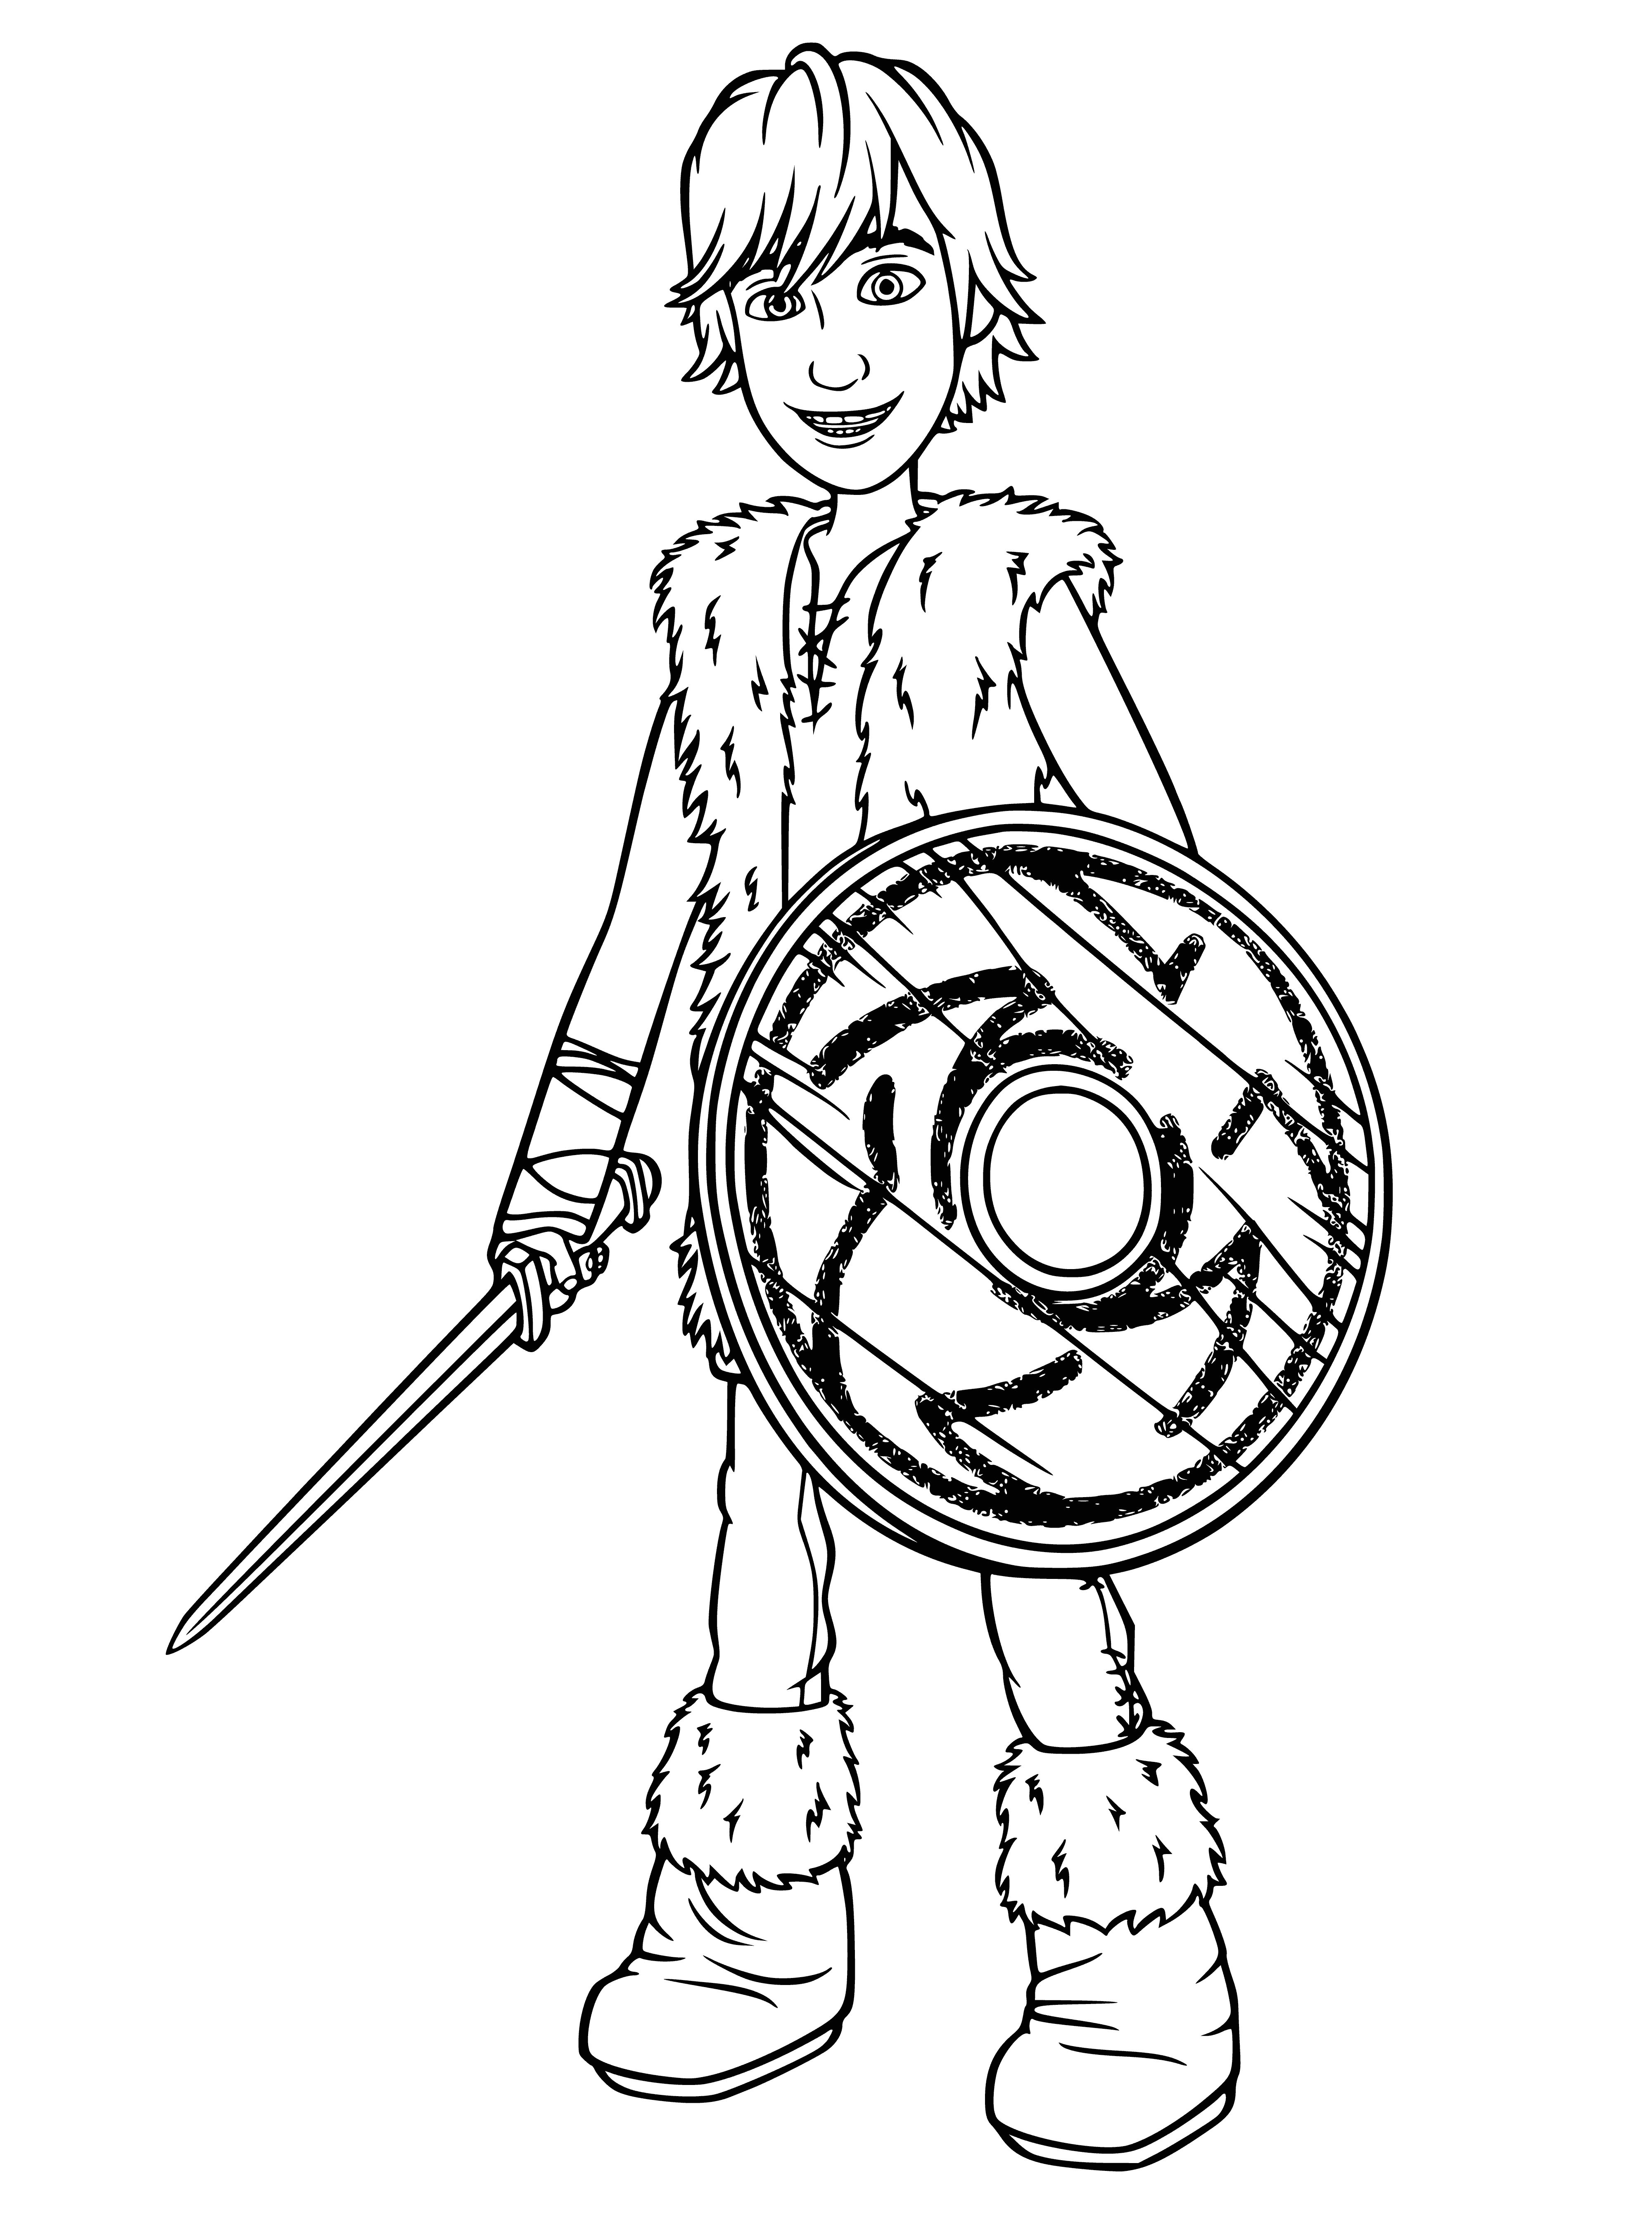 coloring page: Hiccup stands, sword and dragon-friend in hand, ready for adventure! #HowToTrainYourDragon